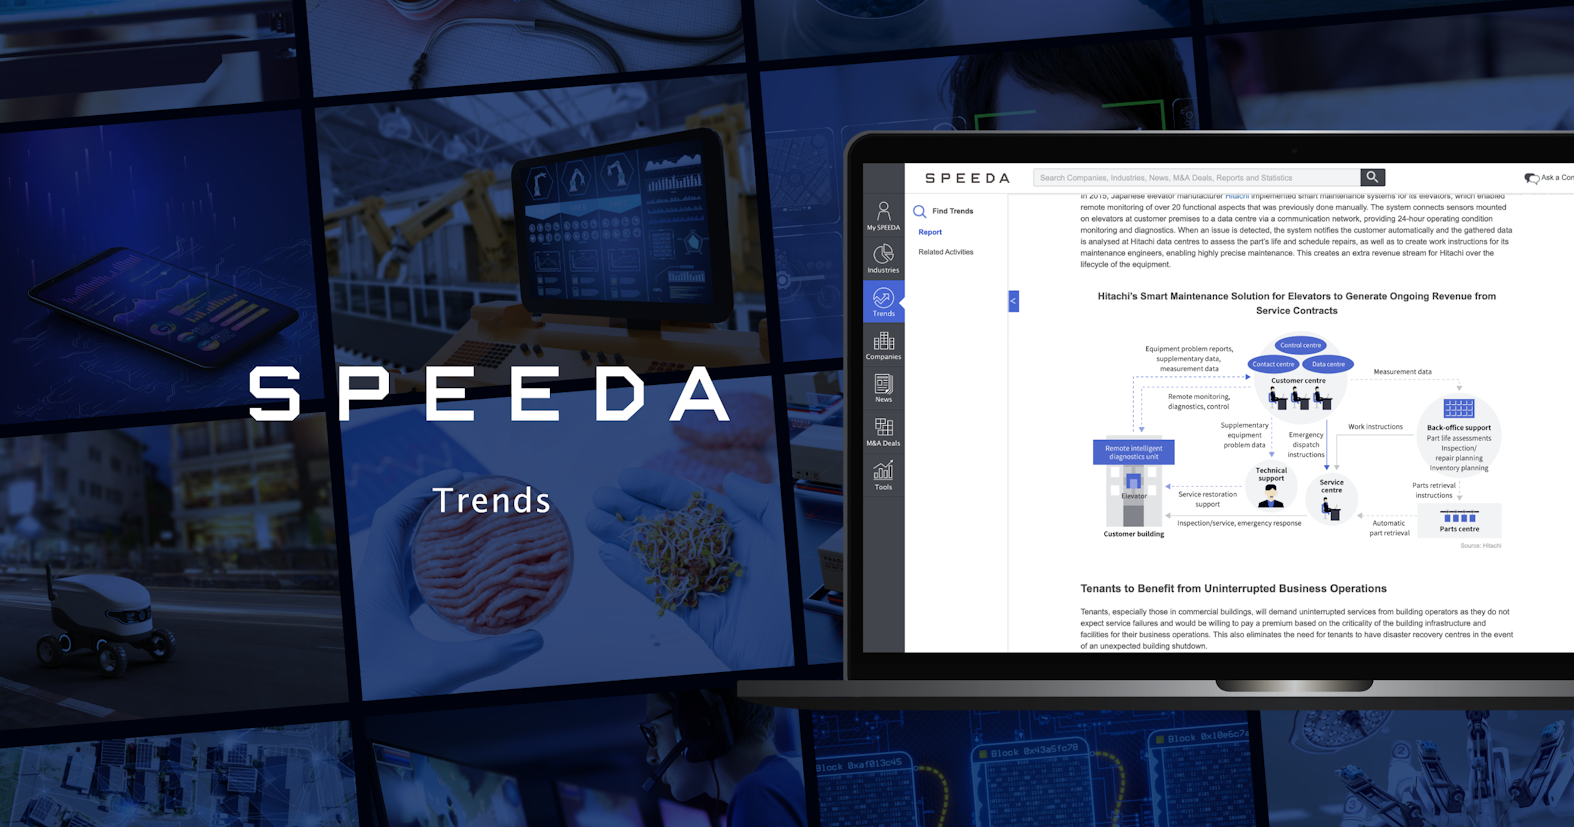 “SPEEDA Trends” Released in English—Original Content on the Latest Developments Driving Corporate Evolution